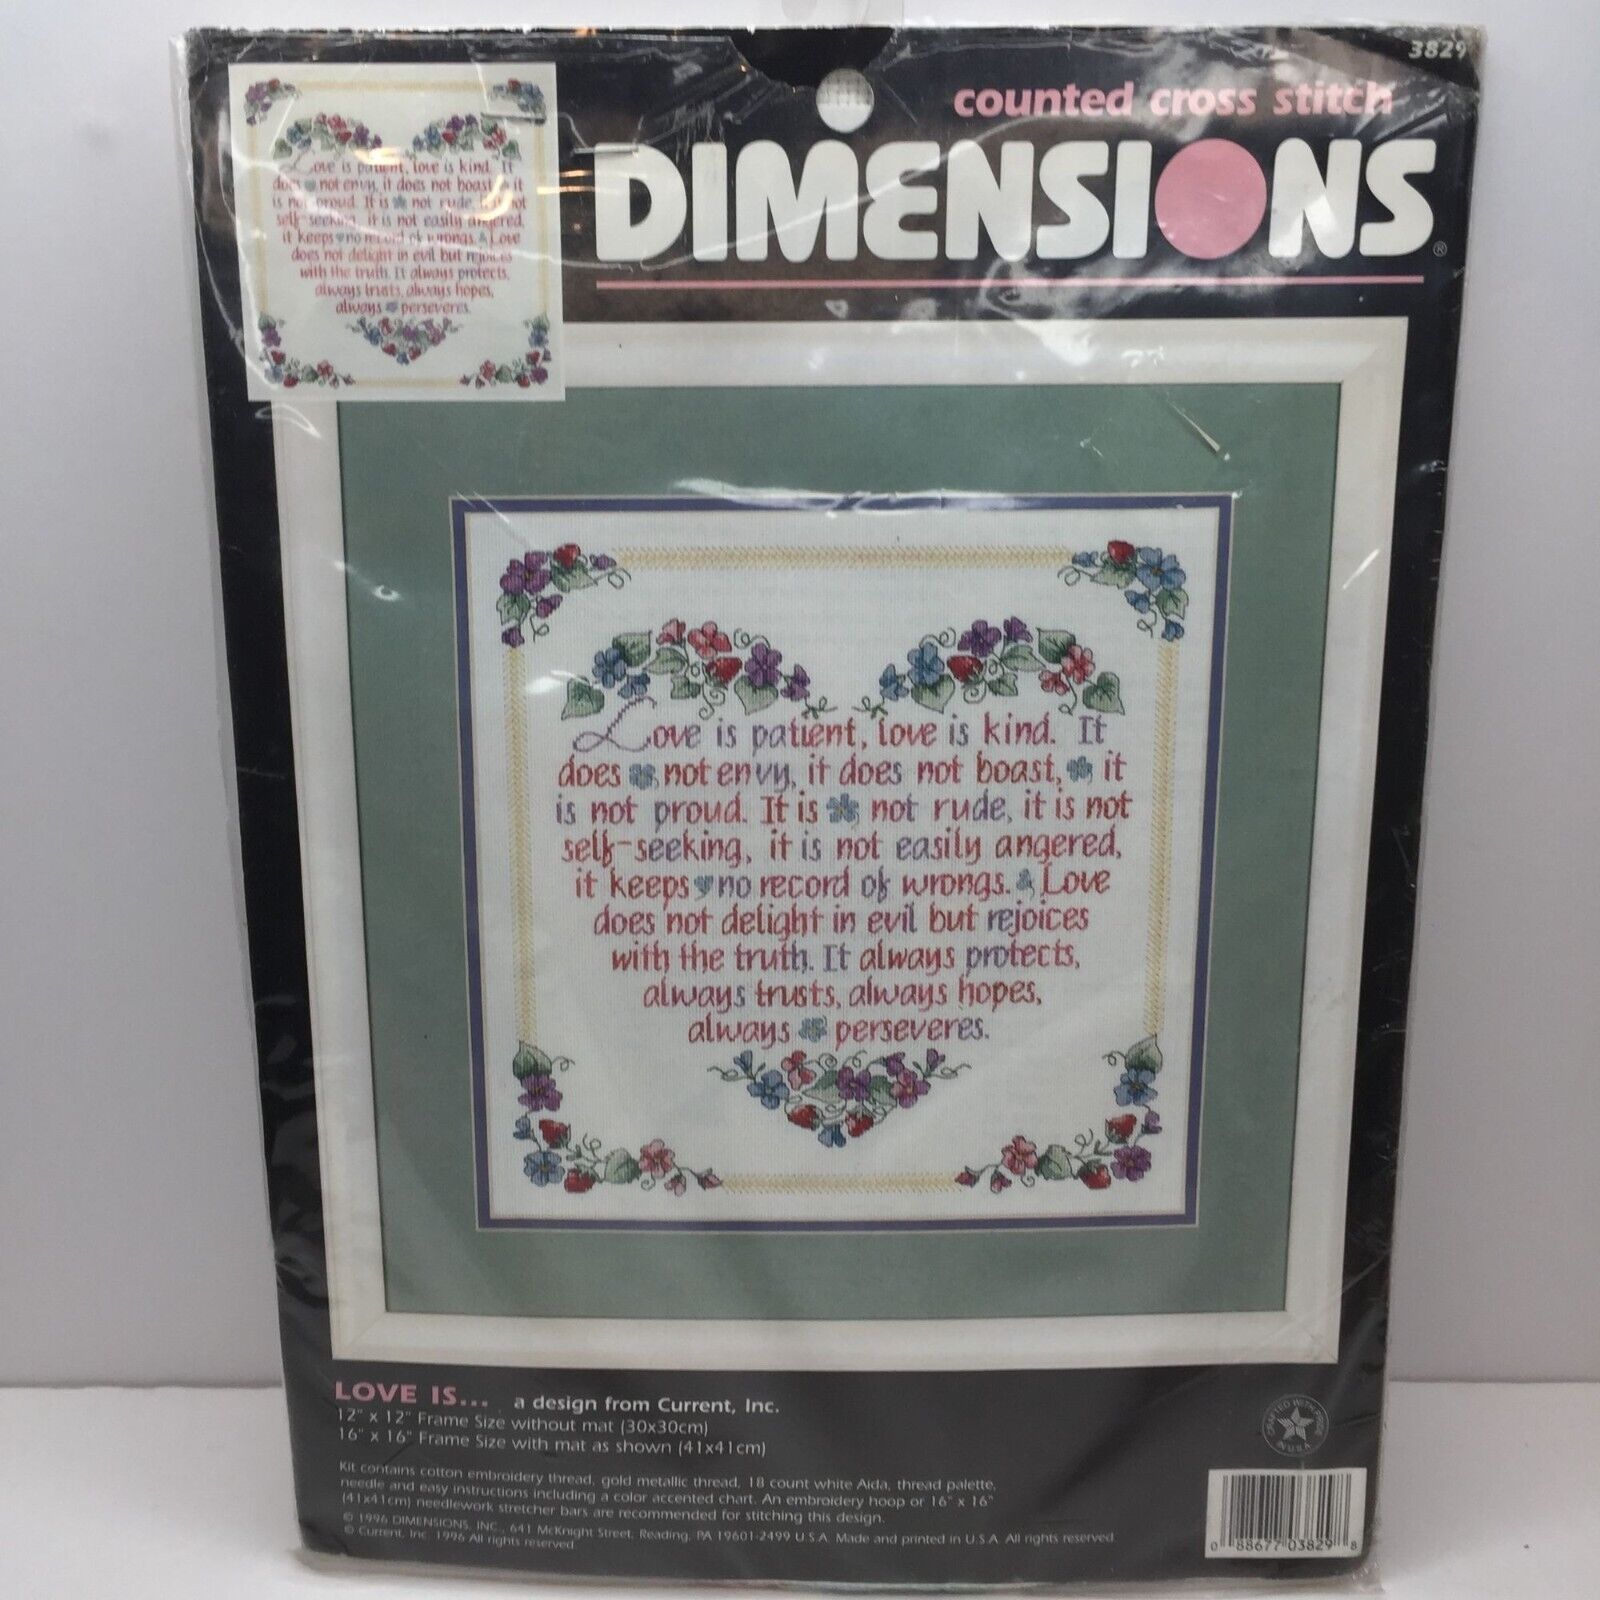 Current Inc Dimensions Counted Cross Stitch Kit Love Is.. 12"x12" Sewing Project - $19.99